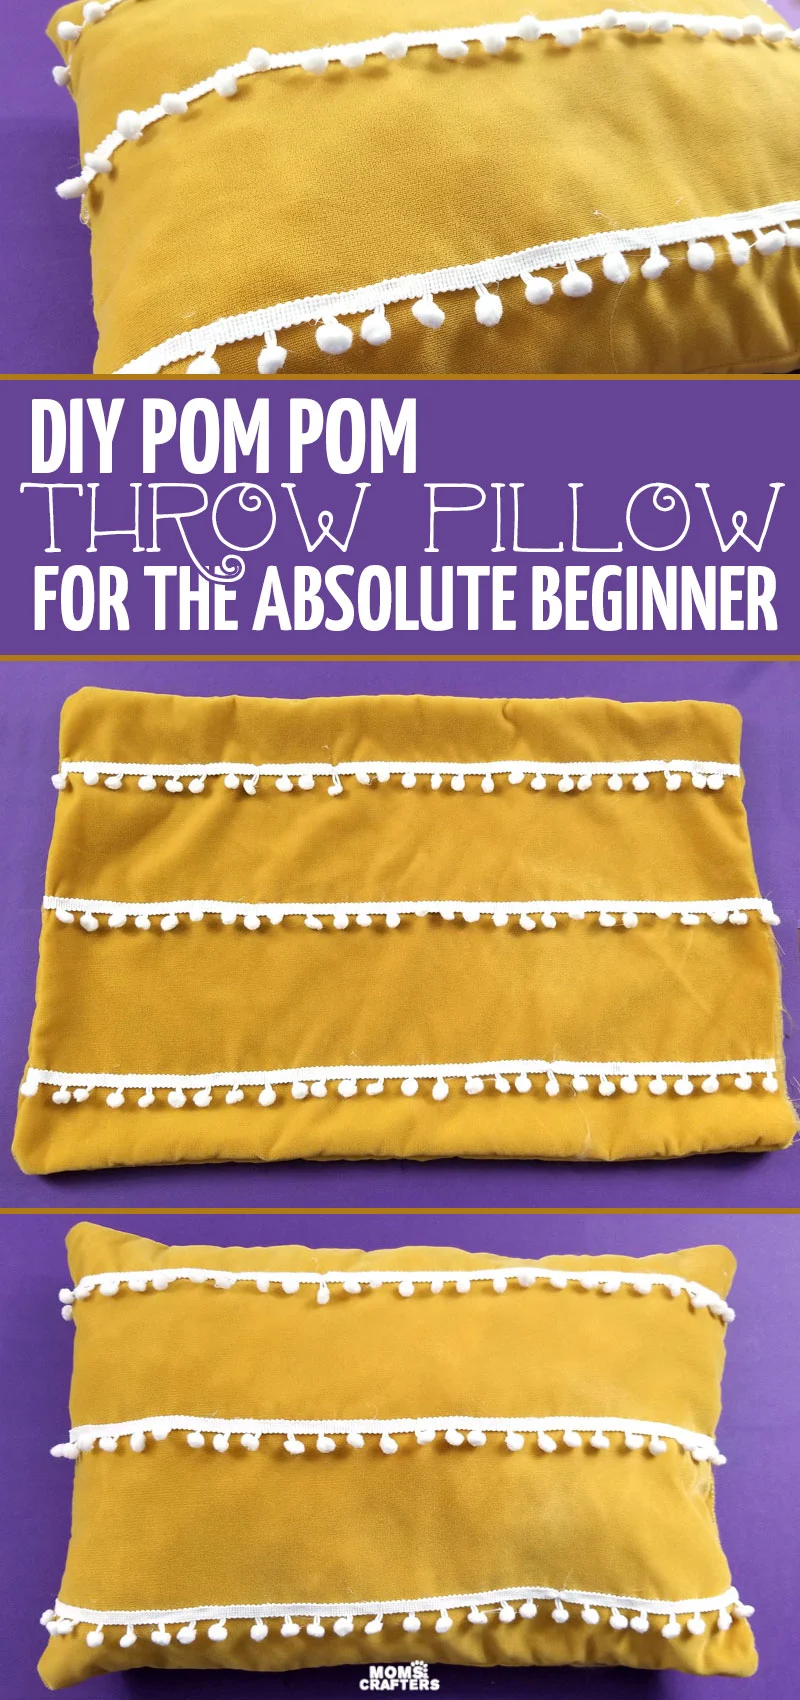 Click to learn how to make a DIY pom pom pillow - a super easy and cheap sewing project for beginners! This simple tutorial is perfect for teens and tweens learning to sew, and is a great DIY decor throw pillow for the living room.